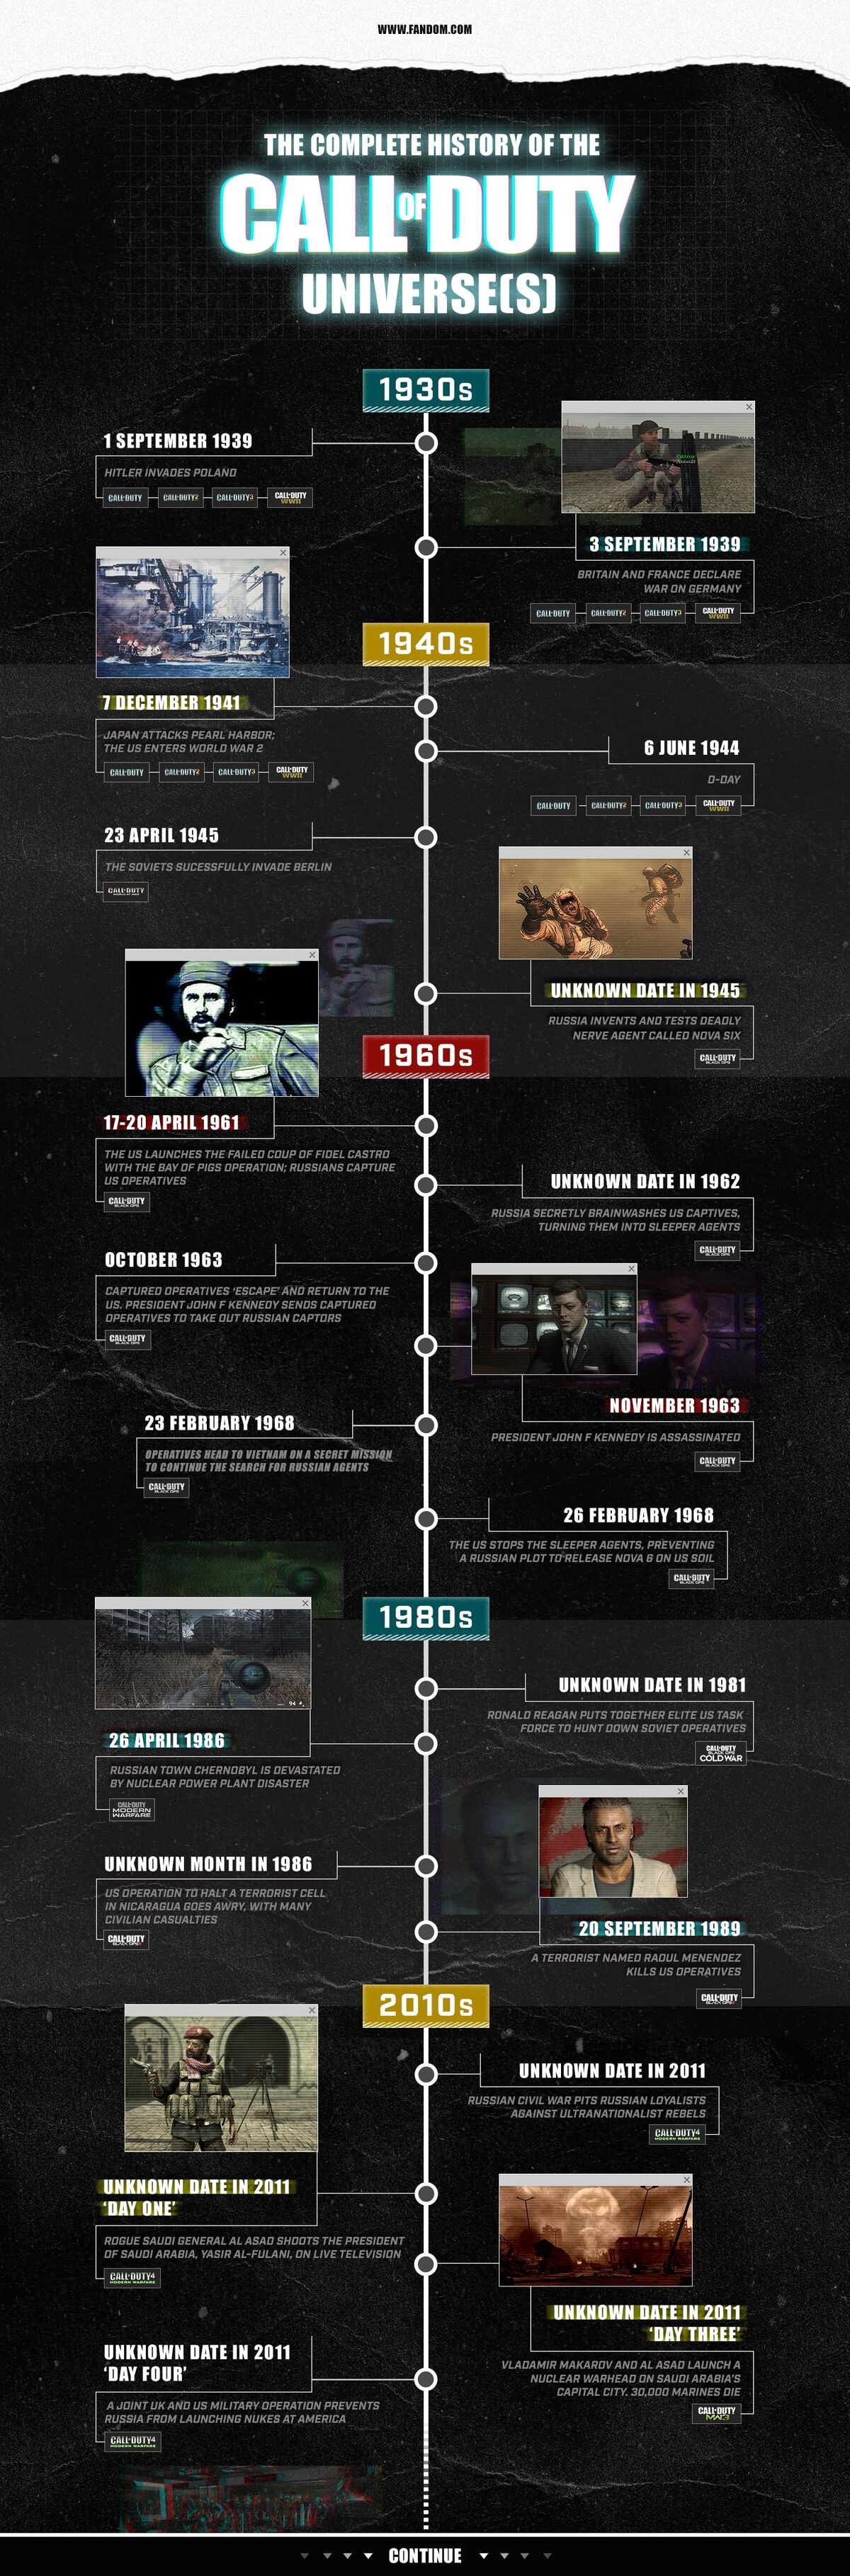 The Complete ‘Call of Duty’ Timeline(s) Fandom